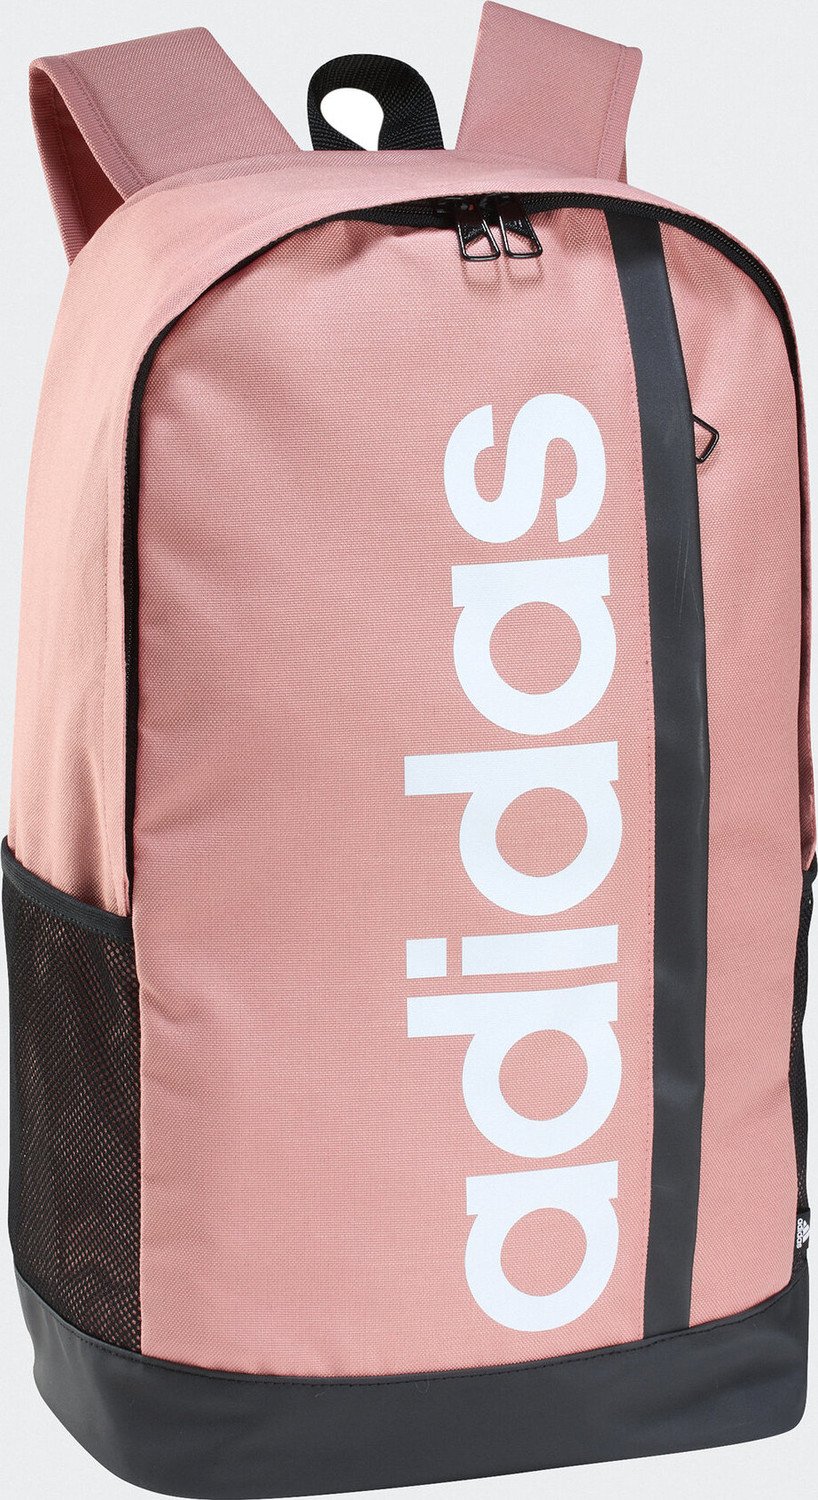 Batoh adidas Essentials Linear Backpack IL5767 wonder clay/white